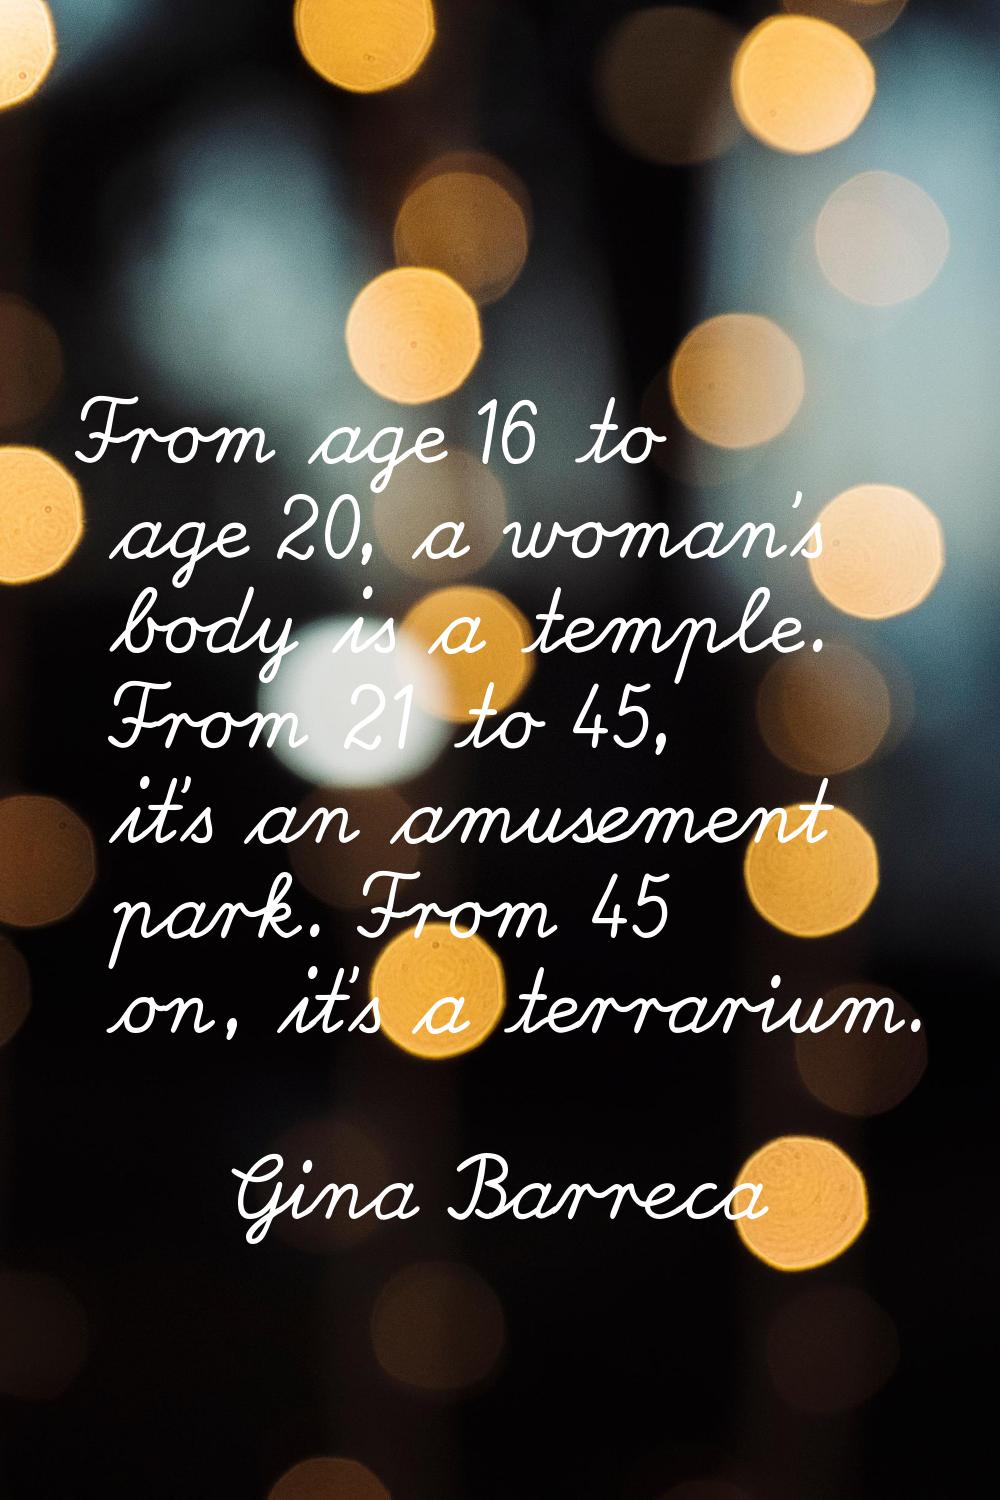 From age 16 to age 20, a woman's body is a temple. From 21 to 45, it's an amusement park. From 45 o